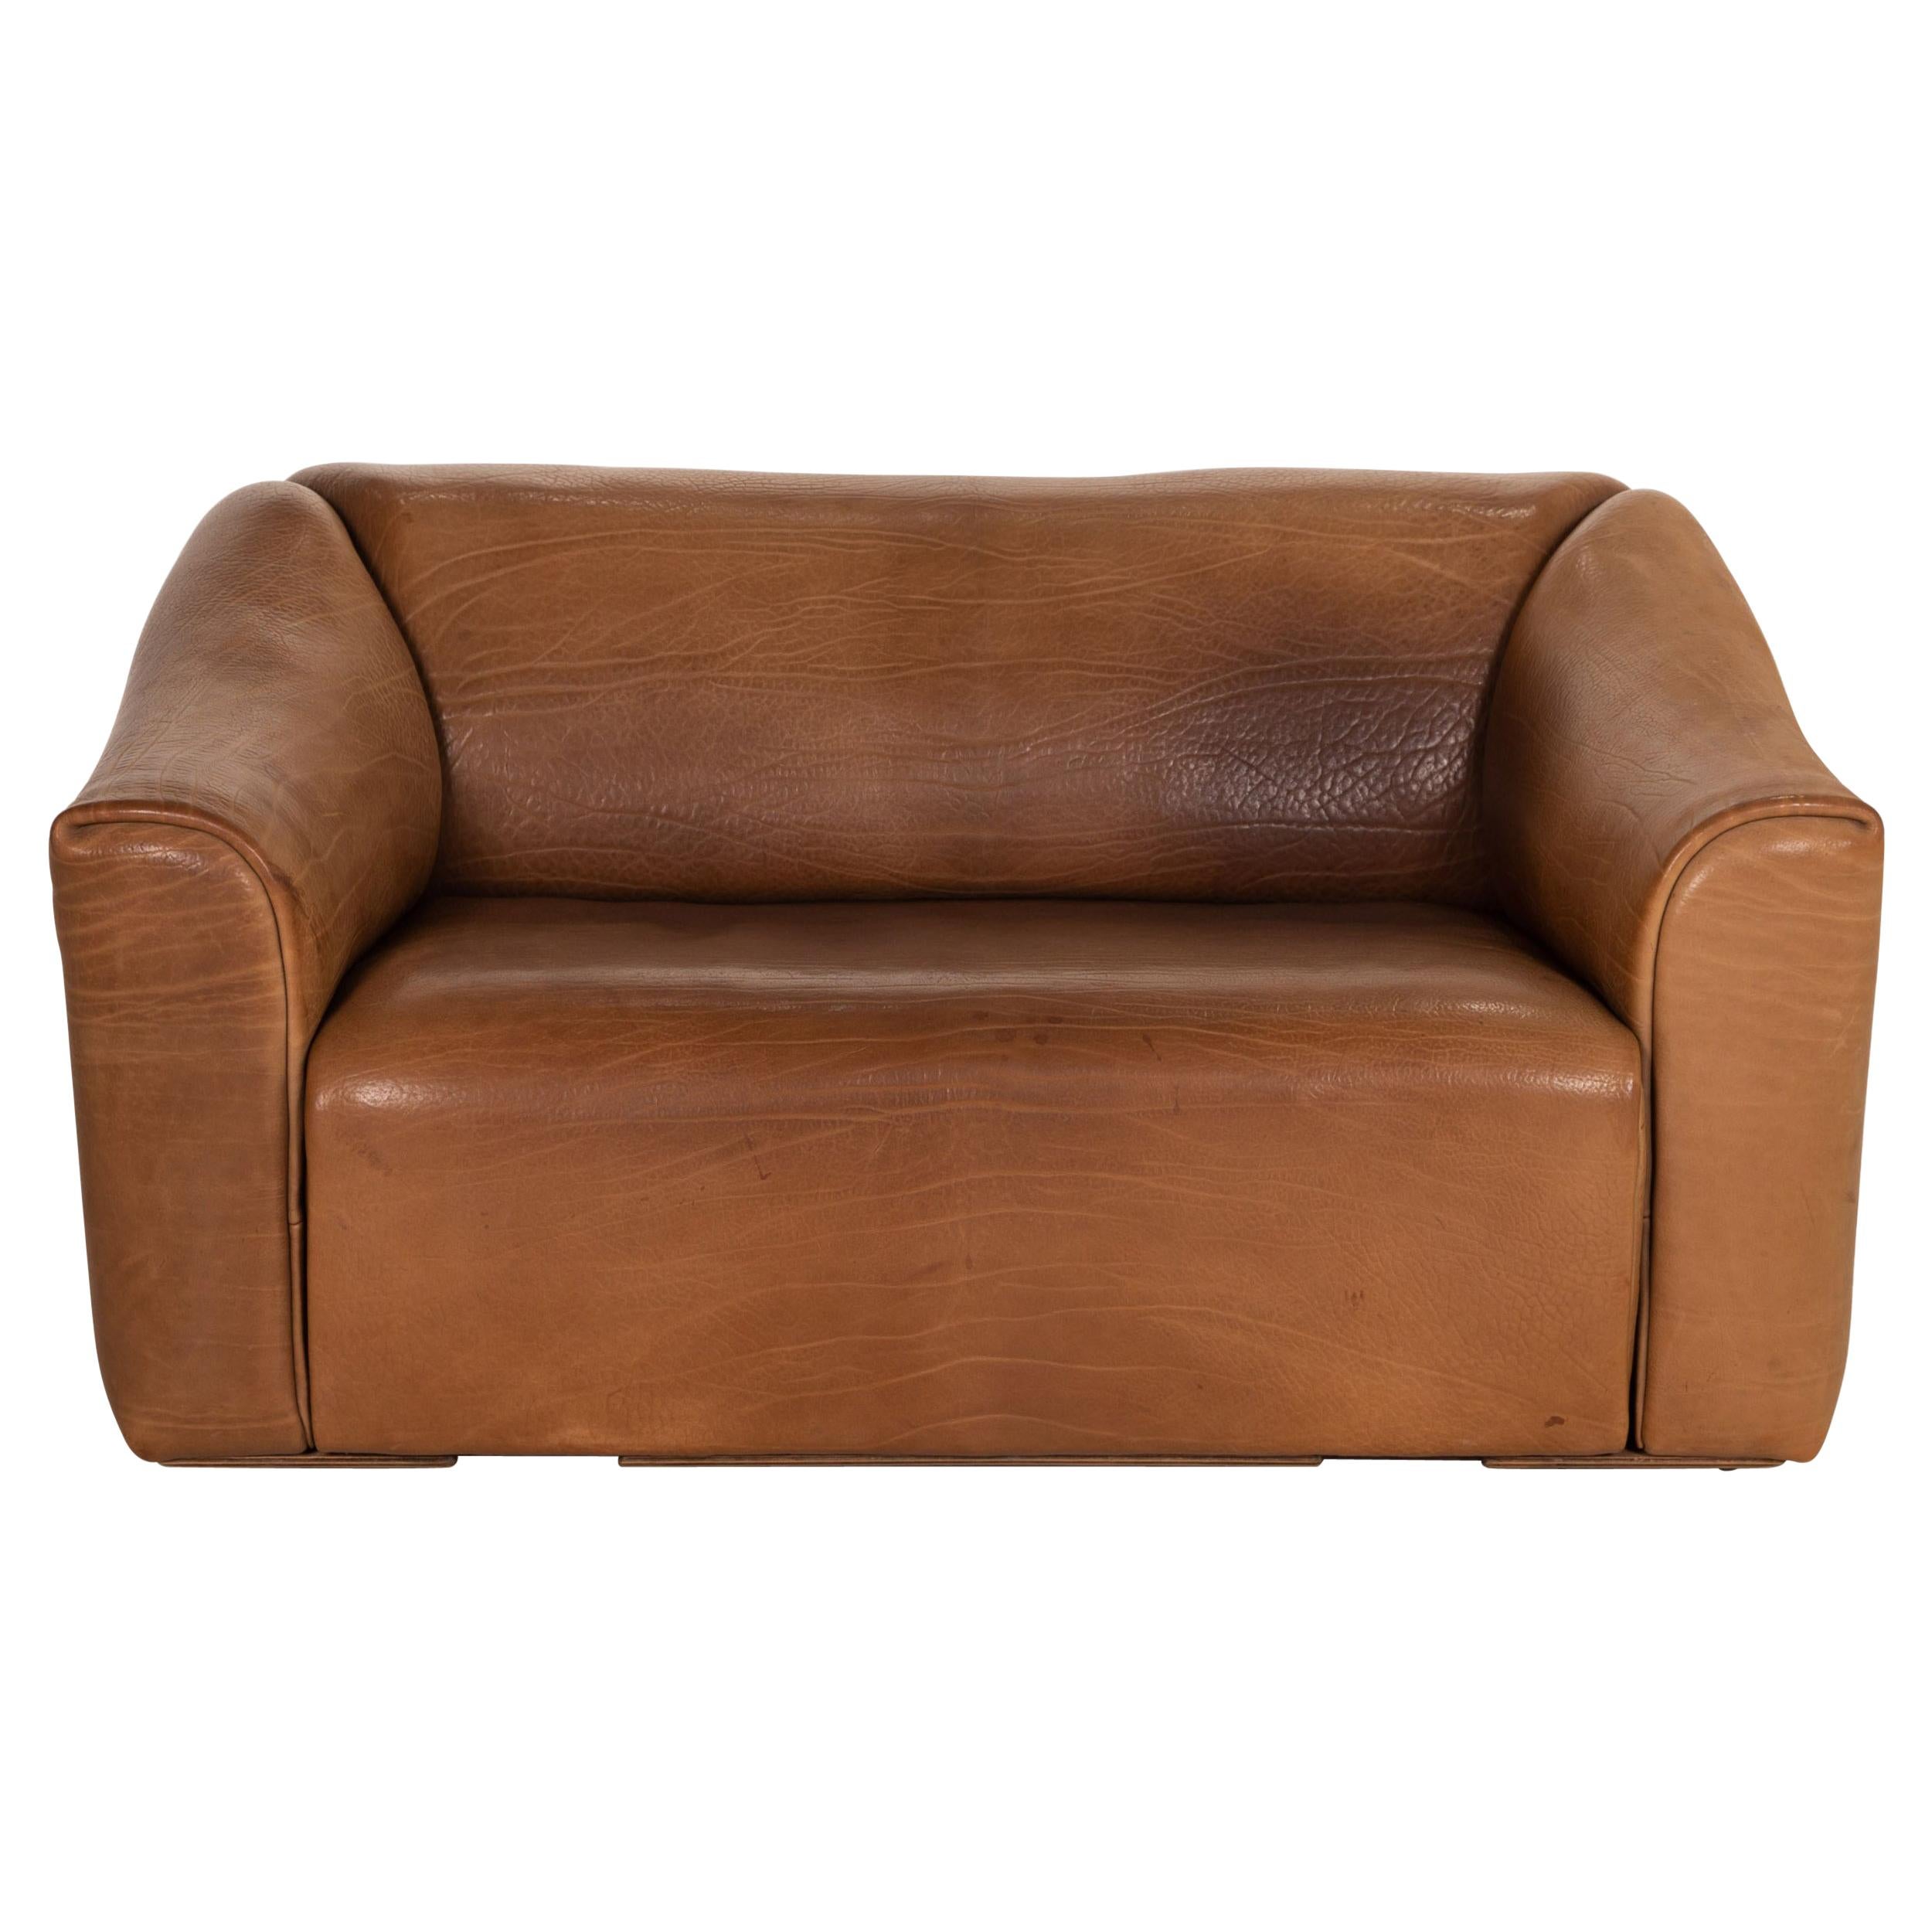 De Sede DS 47 Leather Sofa Brown Two-Seater Function Vintage Couch For Sale